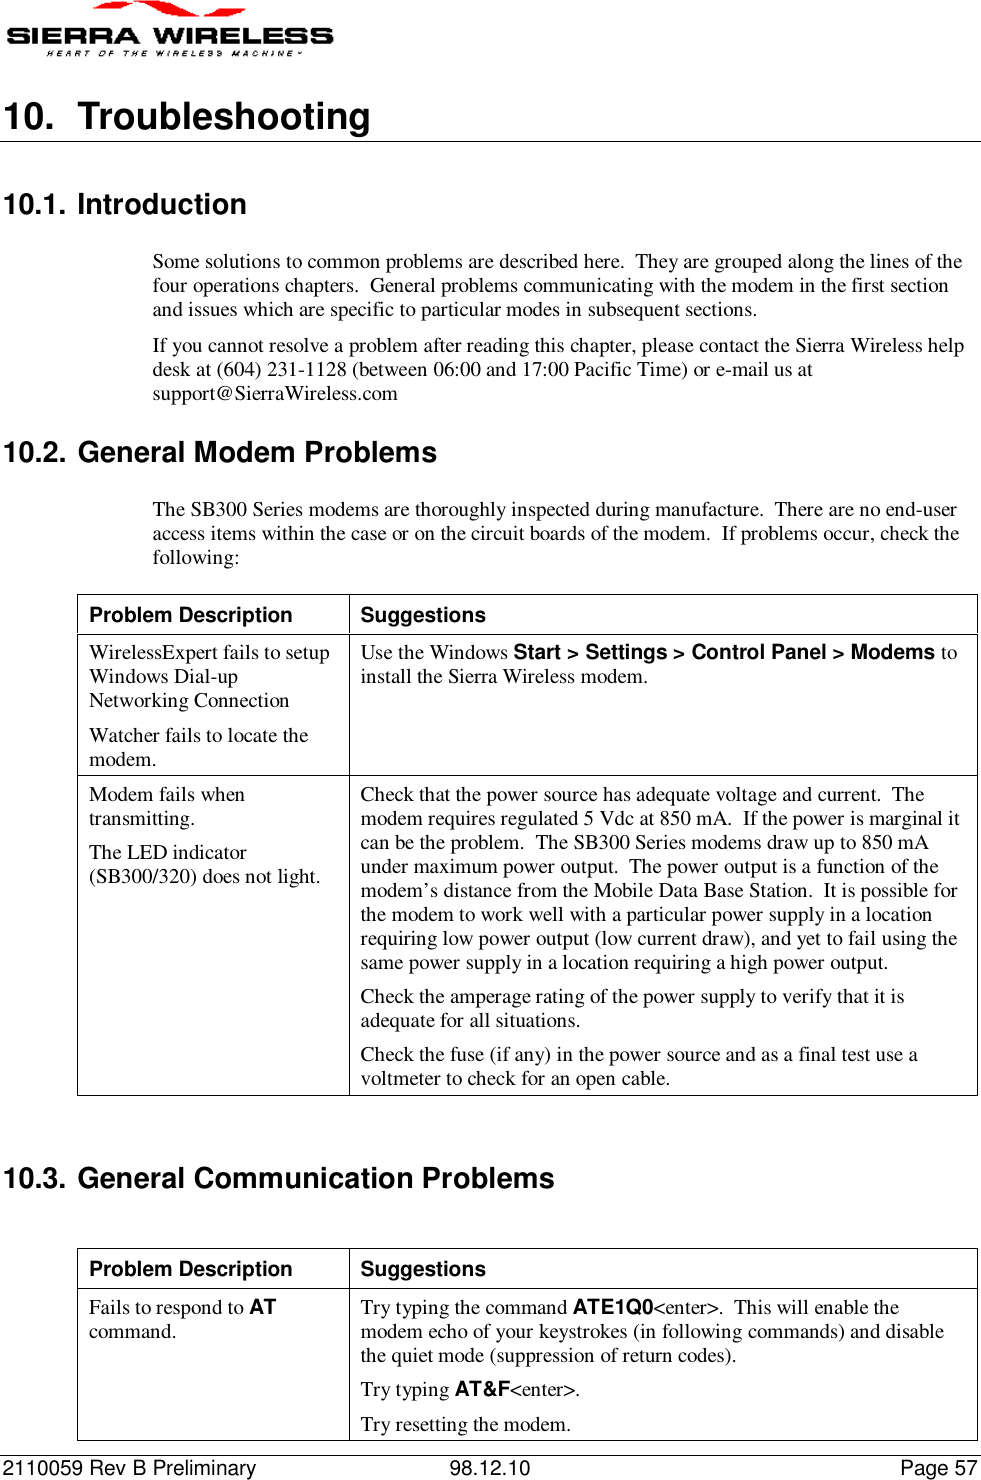 2110059 Rev B Preliminary 98.12.10 Page 5710. Troubleshooting10.1. IntroductionSome solutions to common problems are described here.  They are grouped along the lines of thefour operations chapters.  General problems communicating with the modem in the first sectionand issues which are specific to particular modes in subsequent sections.If you cannot resolve a problem after reading this chapter, please contact the Sierra Wireless helpdesk at (604) 231-1128 (between 06:00 and 17:00 Pacific Time) or e-mail us atsupport@SierraWireless.com10.2. General Modem ProblemsThe SB300 Series modems are thoroughly inspected during manufacture.  There are no end-useraccess items within the case or on the circuit boards of the modem.  If problems occur, check thefollowing:Problem Description SuggestionsWirelessExpert fails to setupWindows Dial-upNetworking ConnectionWatcher fails to locate themodem.Use the Windows Start &gt; Settings &gt; Control Panel &gt; Modems toinstall the Sierra Wireless modem.Modem fails whentransmitting.The LED indicator(SB300/320) does not light.Check that the power source has adequate voltage and current.  Themodem requires regulated 5 Vdc at 850 mA.  If the power is marginal itcan be the problem.  The SB300 Series modems draw up to 850 mAunder maximum power output.  The power output is a function of themodem’s distance from the Mobile Data Base Station.  It is possible forthe modem to work well with a particular power supply in a locationrequiring low power output (low current draw), and yet to fail using thesame power supply in a location requiring a high power output.Check the amperage rating of the power supply to verify that it isadequate for all situations.Check the fuse (if any) in the power source and as a final test use avoltmeter to check for an open cable.10.3. General Communication ProblemsProblem Description SuggestionsFails to respond to ATcommand. Try typing the command ATE1Q0&lt;enter&gt;.  This will enable themodem echo of your keystrokes (in following commands) and disablethe quiet mode (suppression of return codes).Try typing AT&amp;F&lt;enter&gt;.Try resetting the modem.